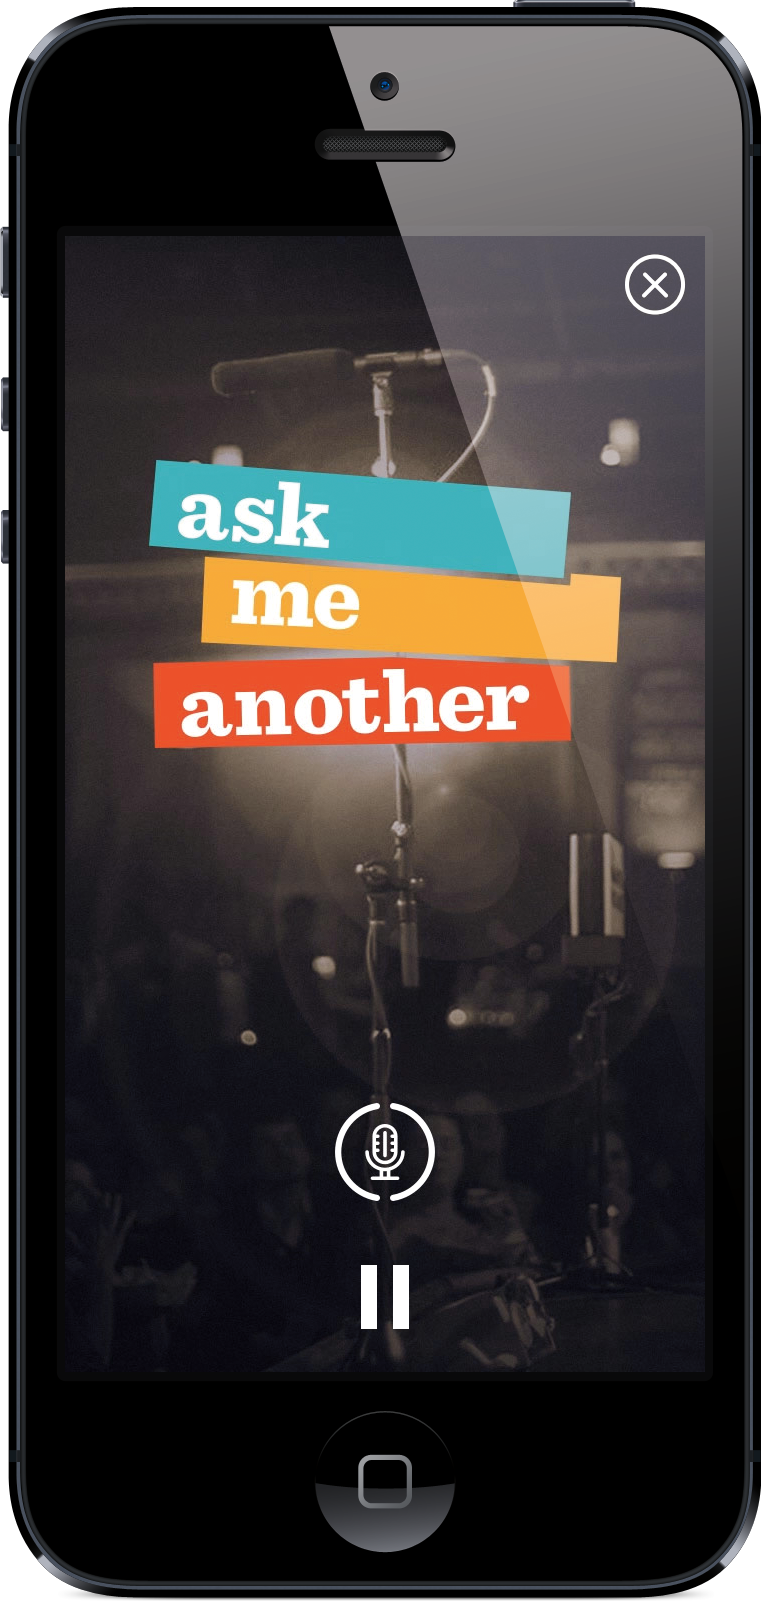 NPR One "Ask Me Another" Promo featuring XAPP Ads